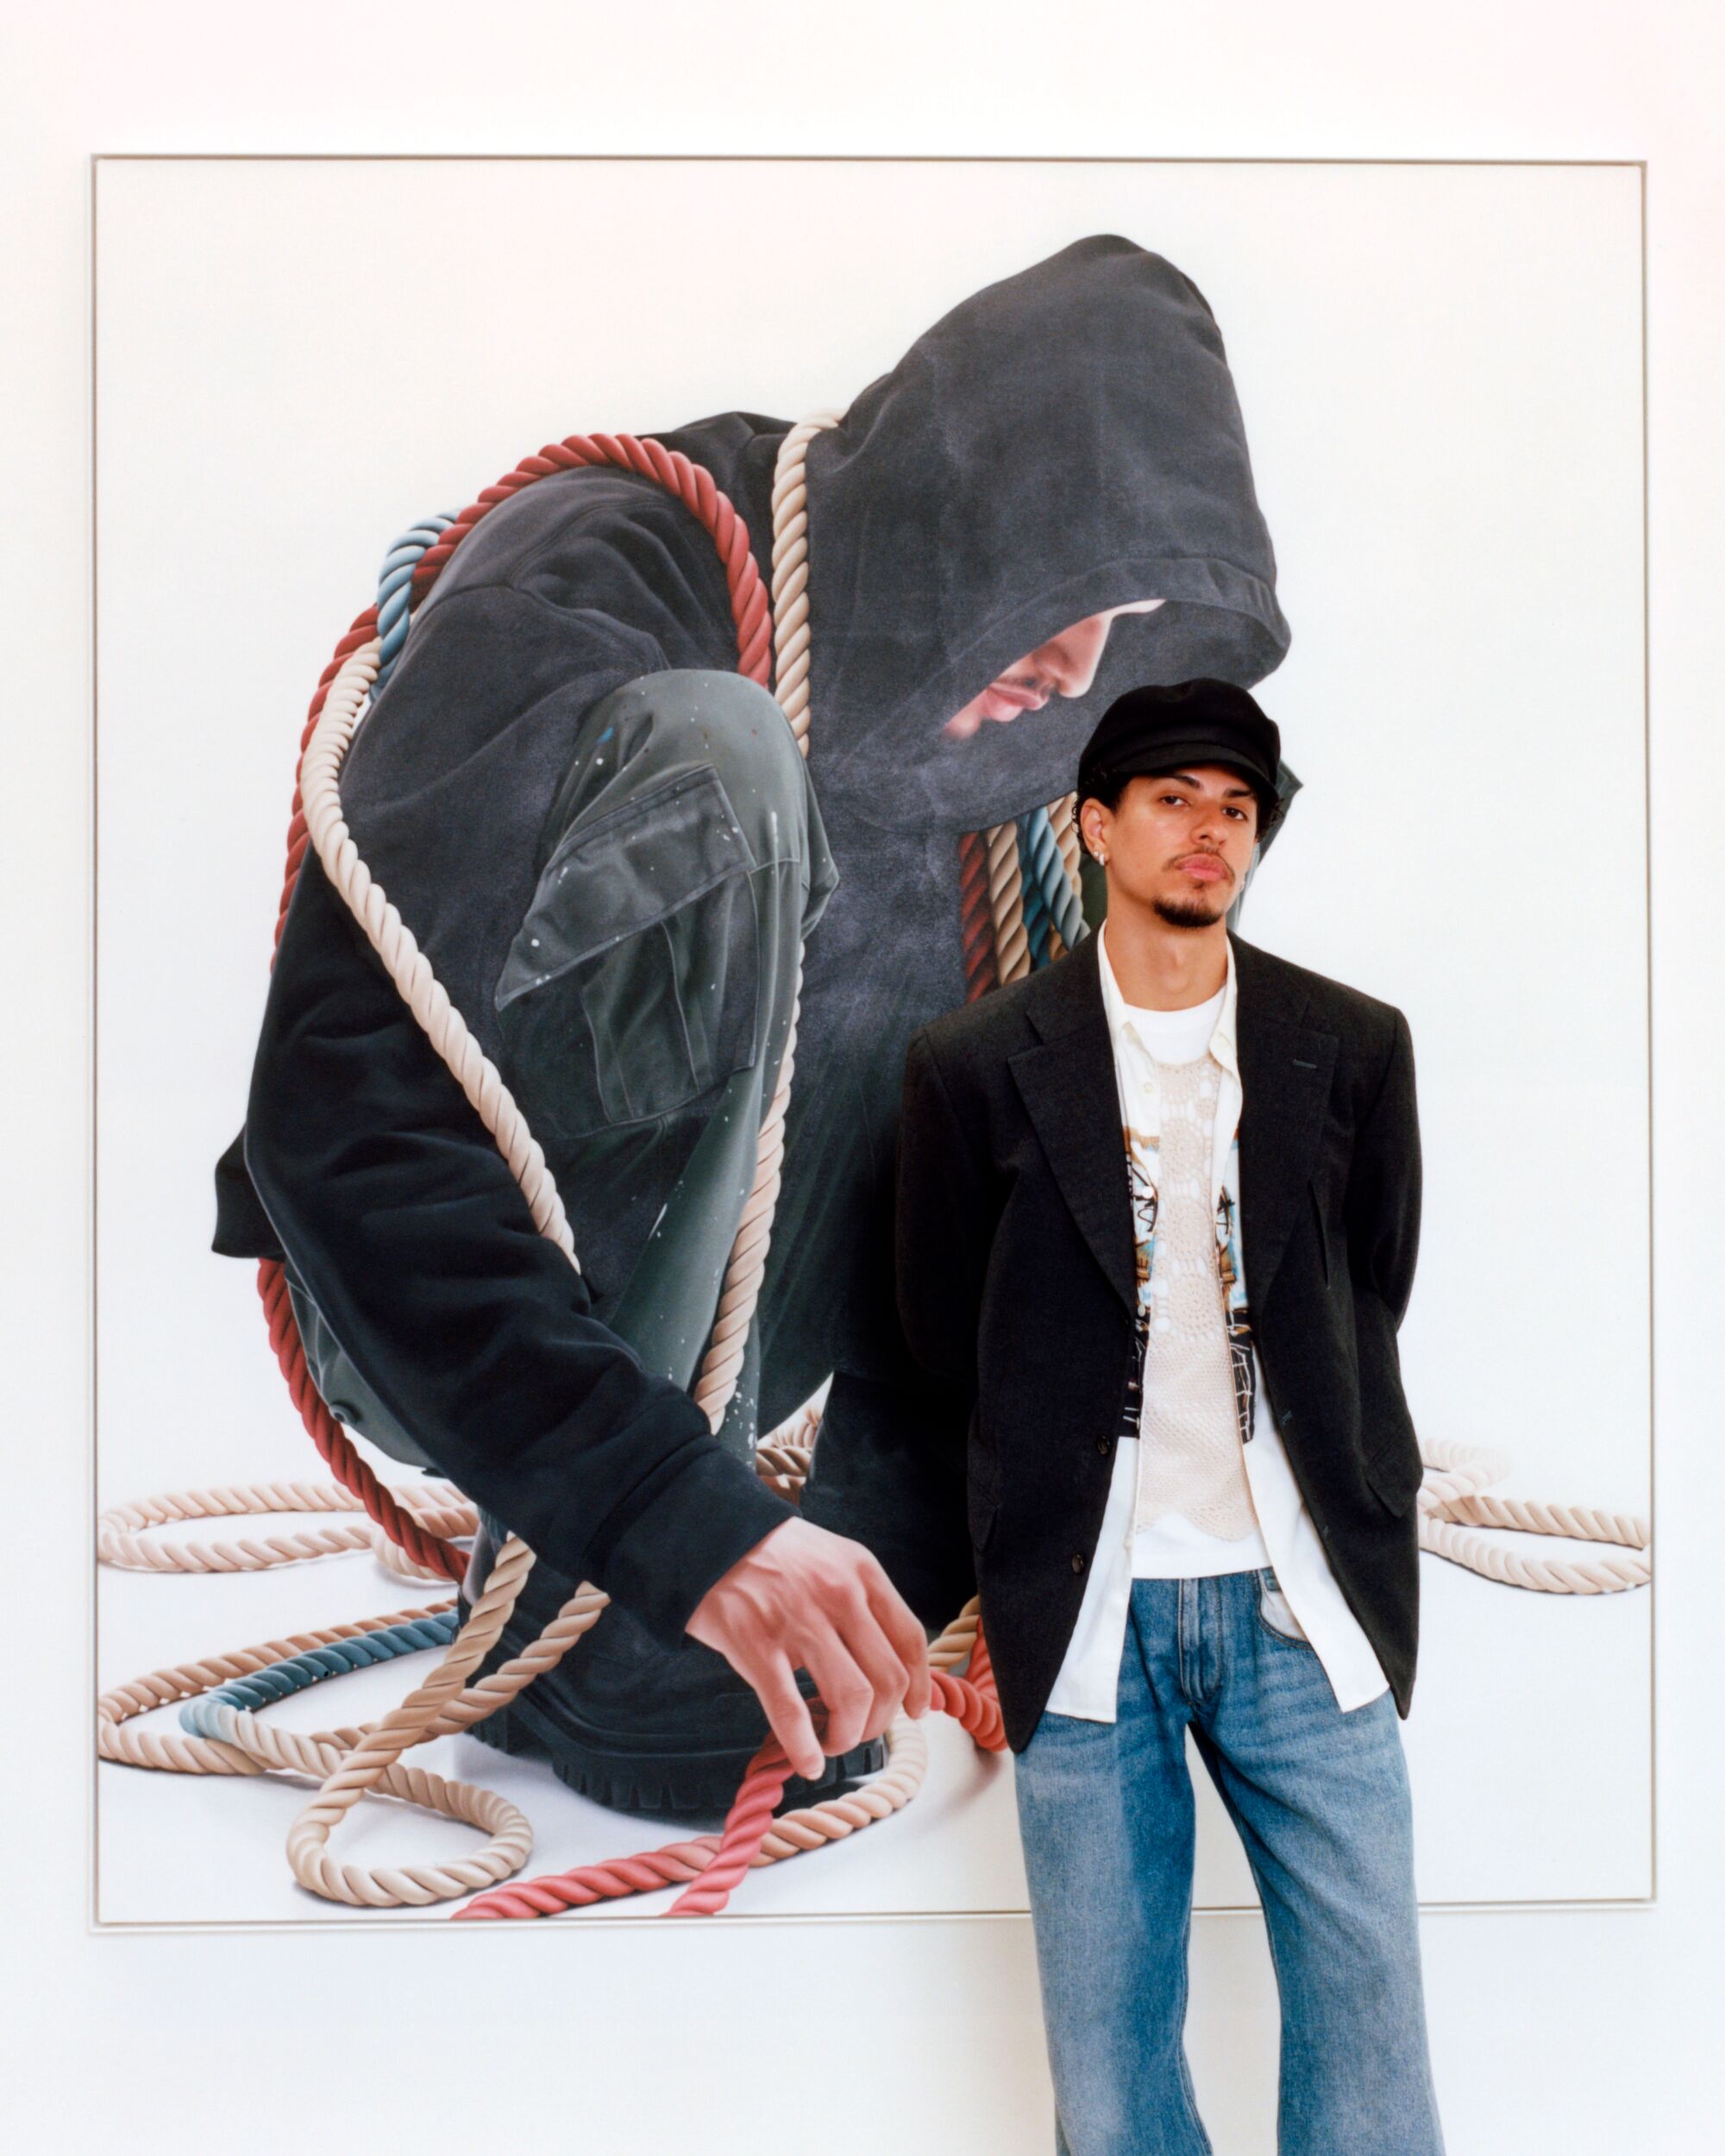 The artist stands in front of one of his paintings of a hooded figure draped in ropes.